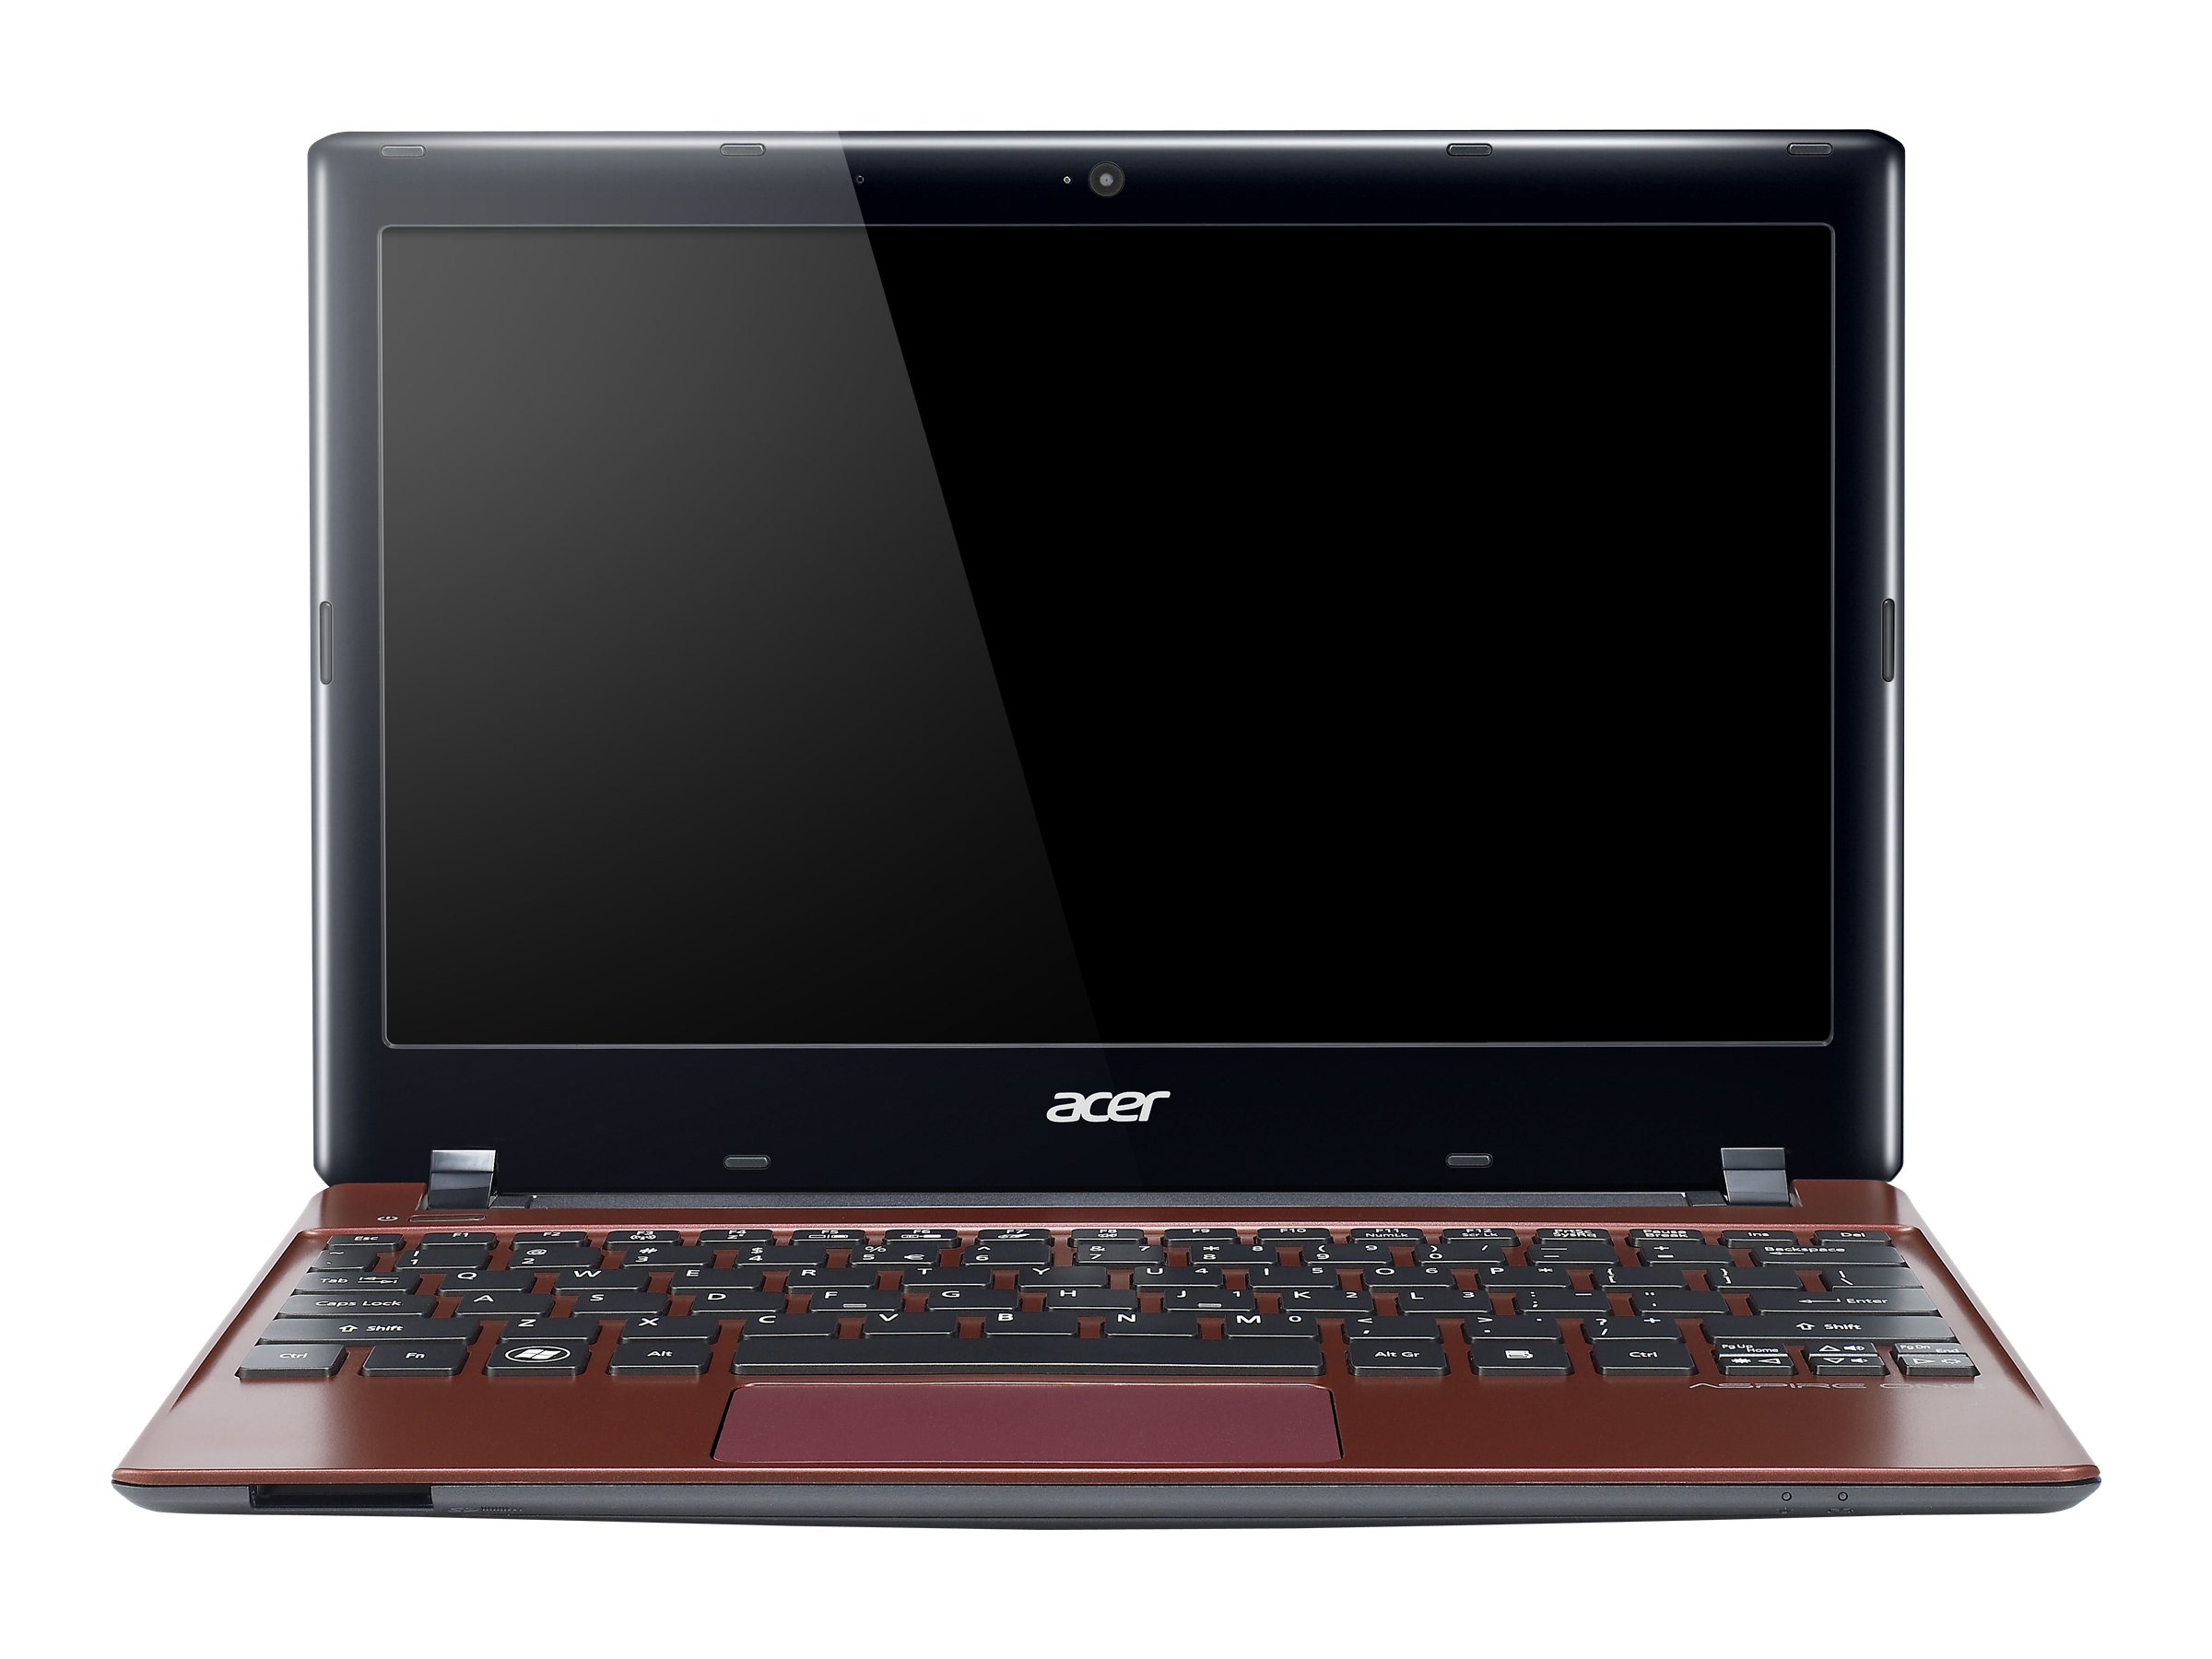 Acer Aspire ONE 756 (997BCRR)